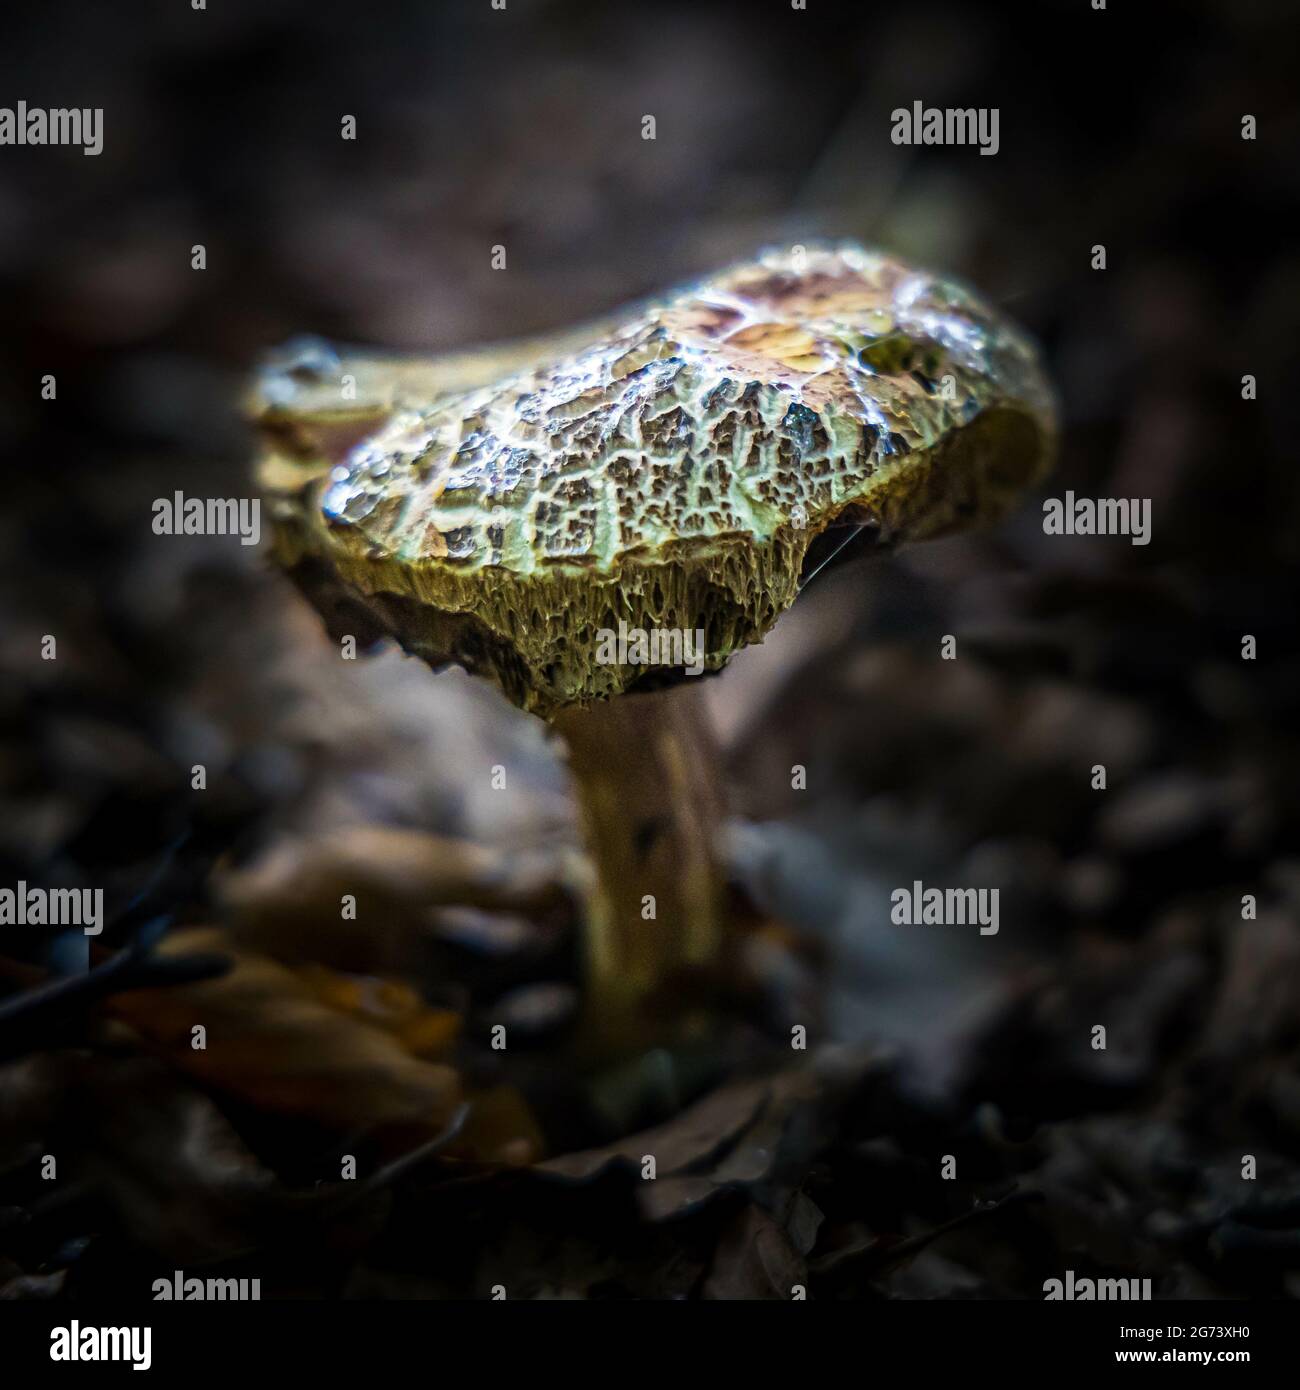 A soft focus an old rotting mushroom on a forest floor Stock Photo